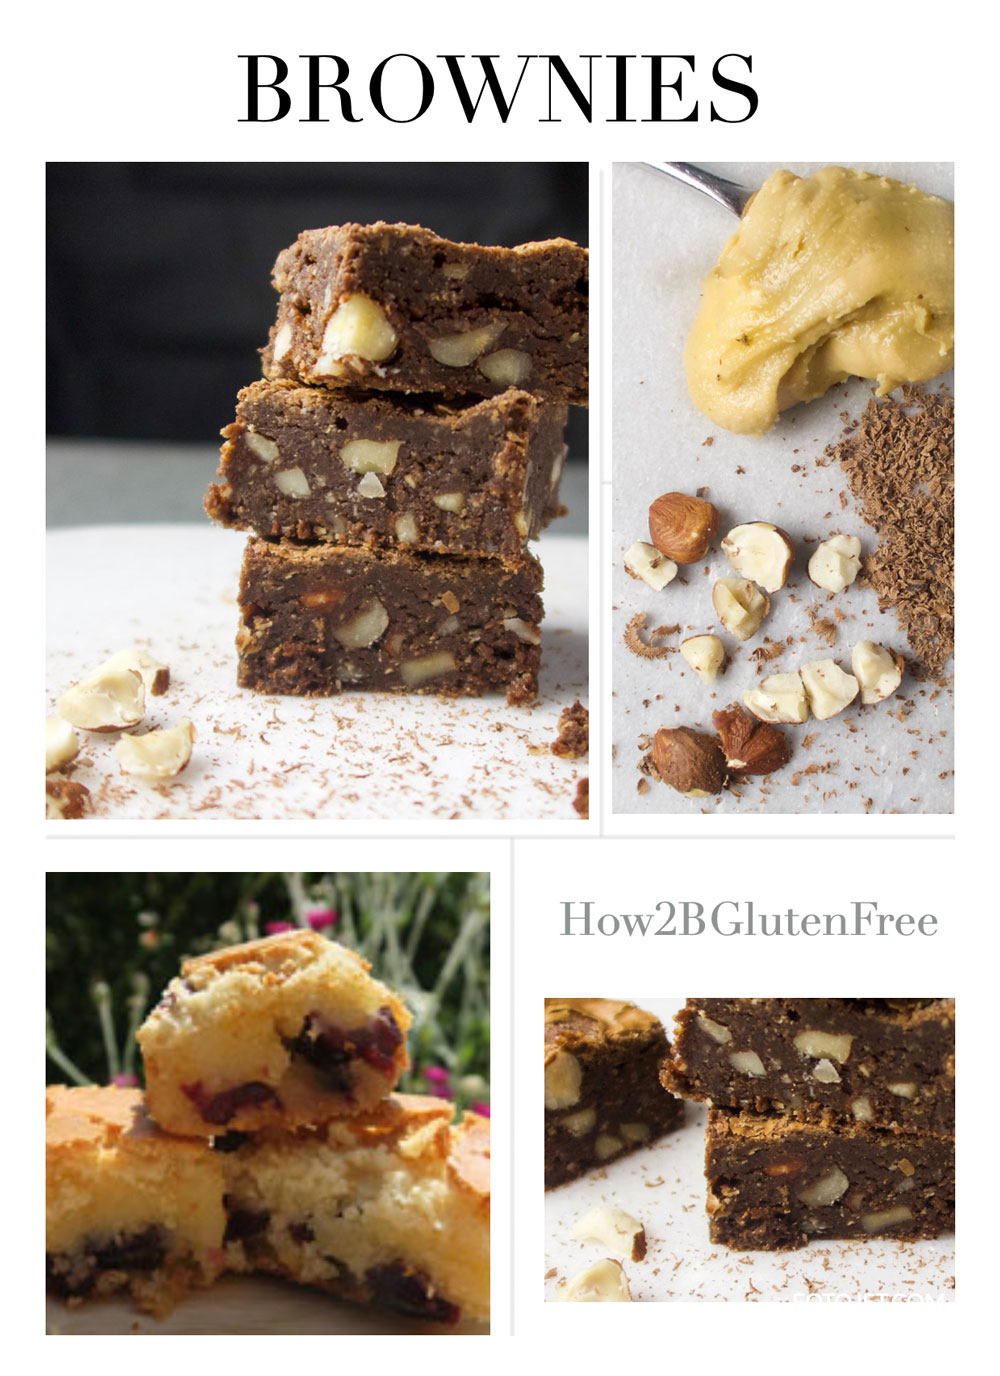 Gluten Free Brownie Recipes.Easy to follow brownie recipes. Whether you like your brownies chewy, fudgy or nutty, there's a recipe for you.